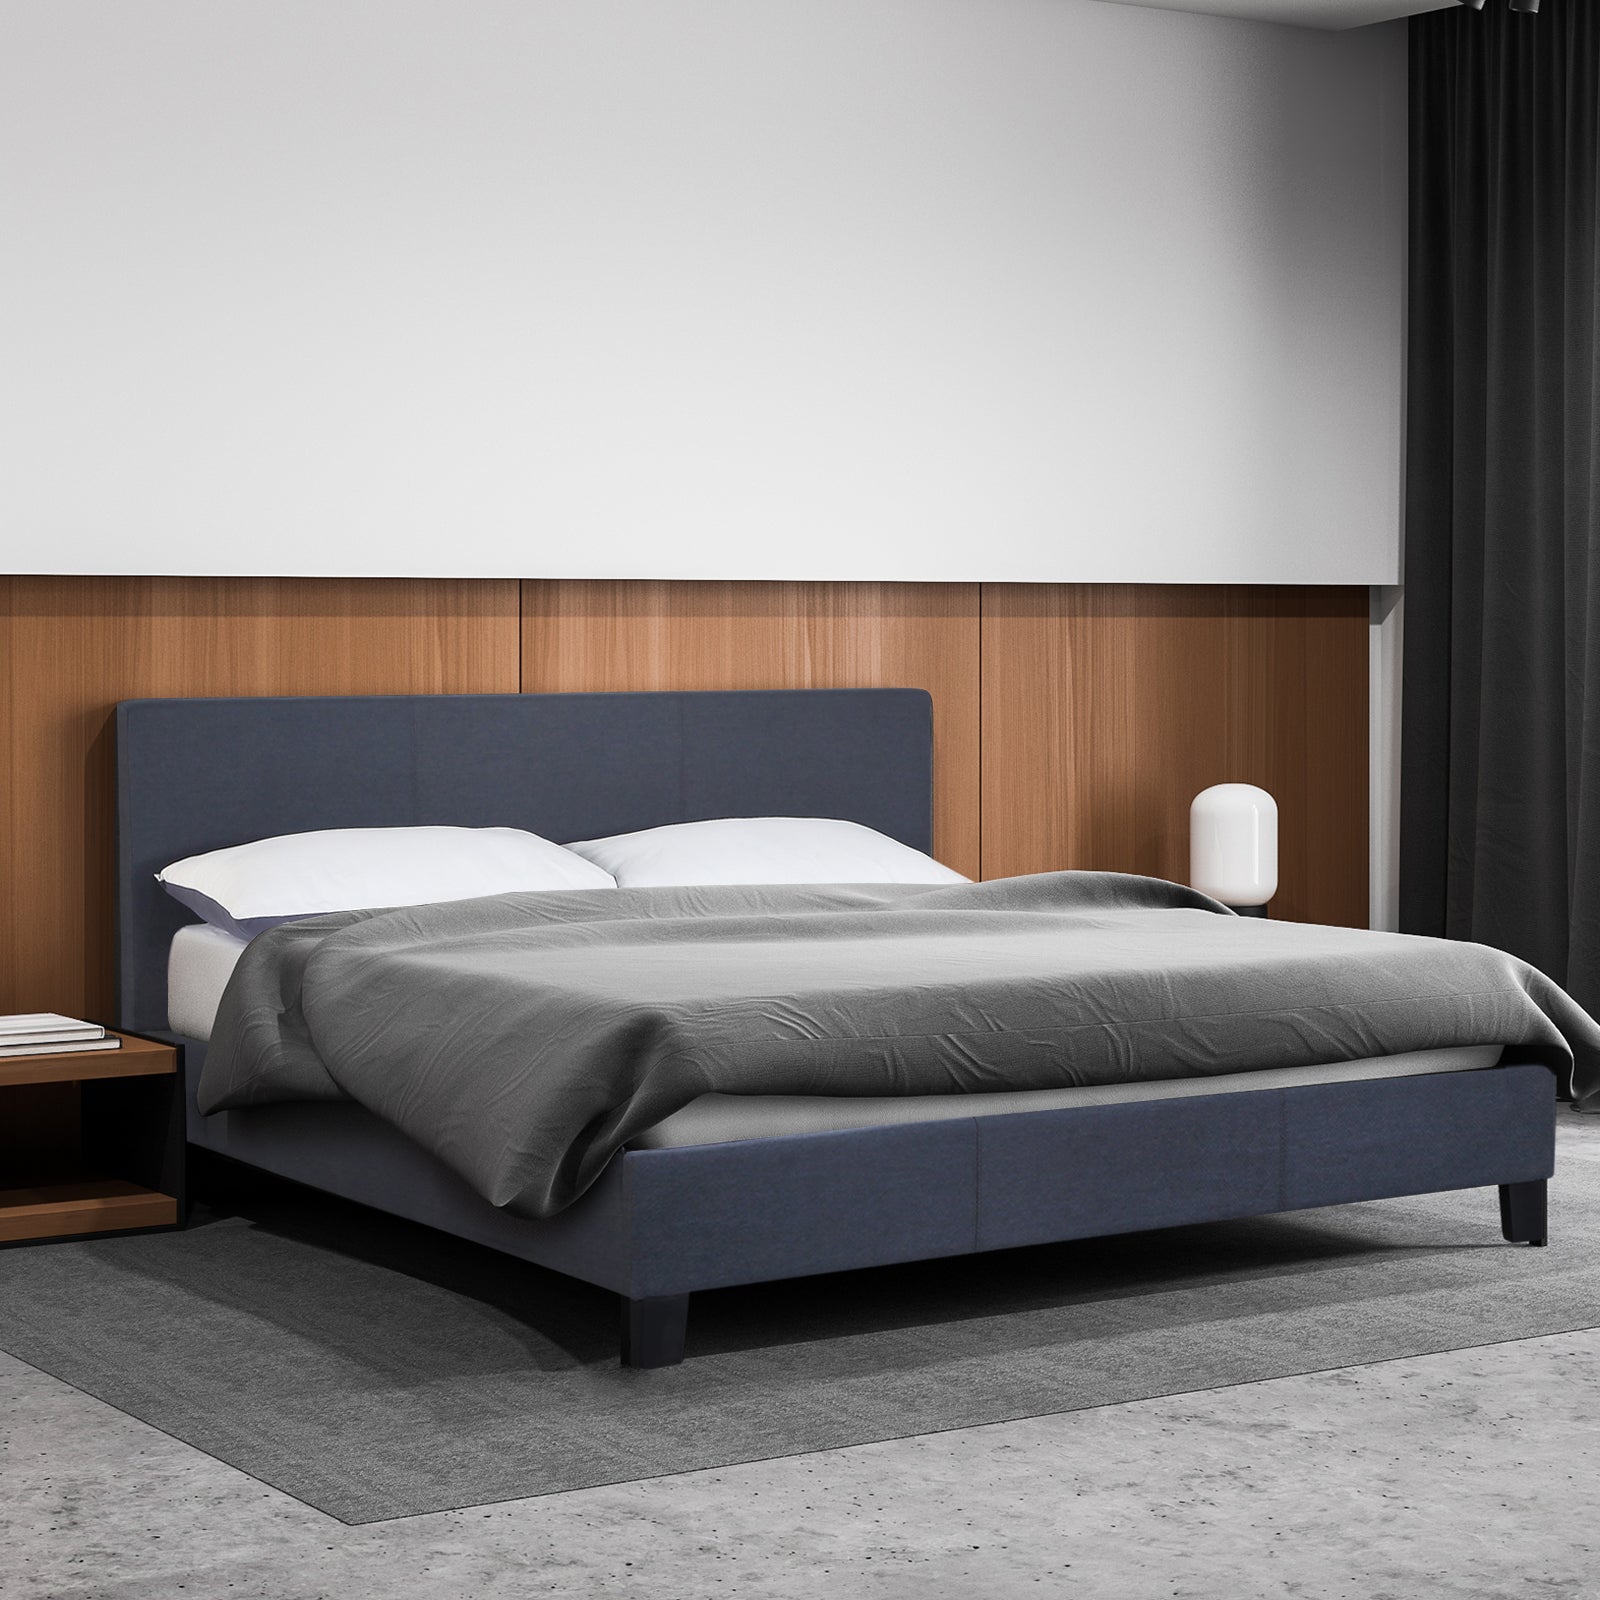 Milano Sienna Luxury Bed with Headboard (Model 2) - Charcoal No.35 - King Single